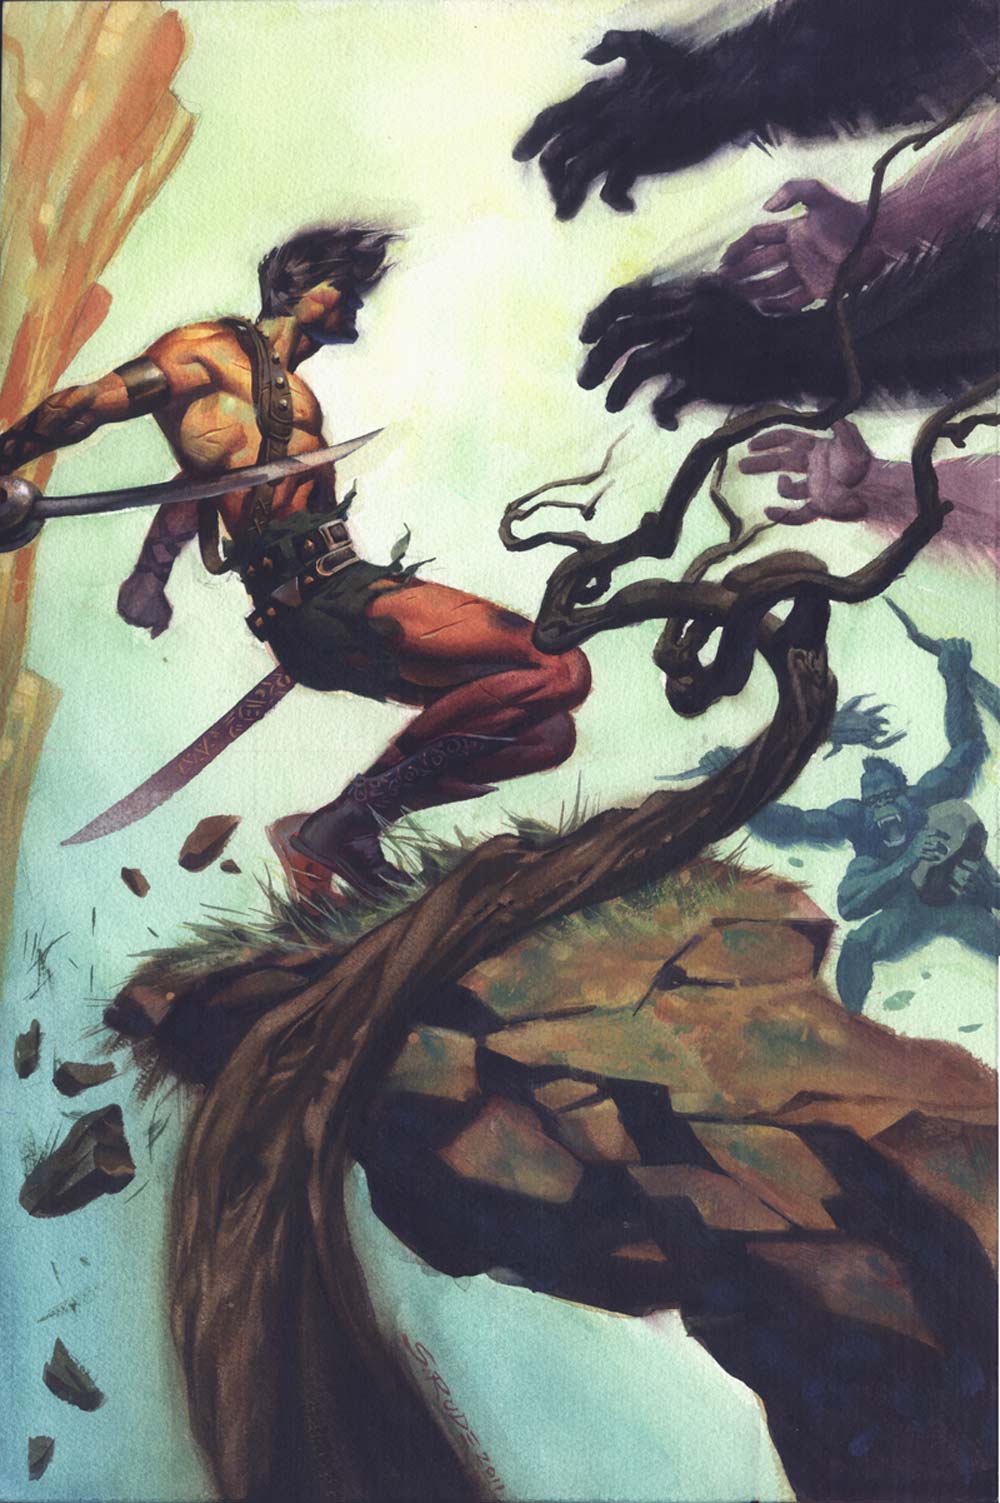 Fashion And Action John Carter Of Mars By Steve Rude